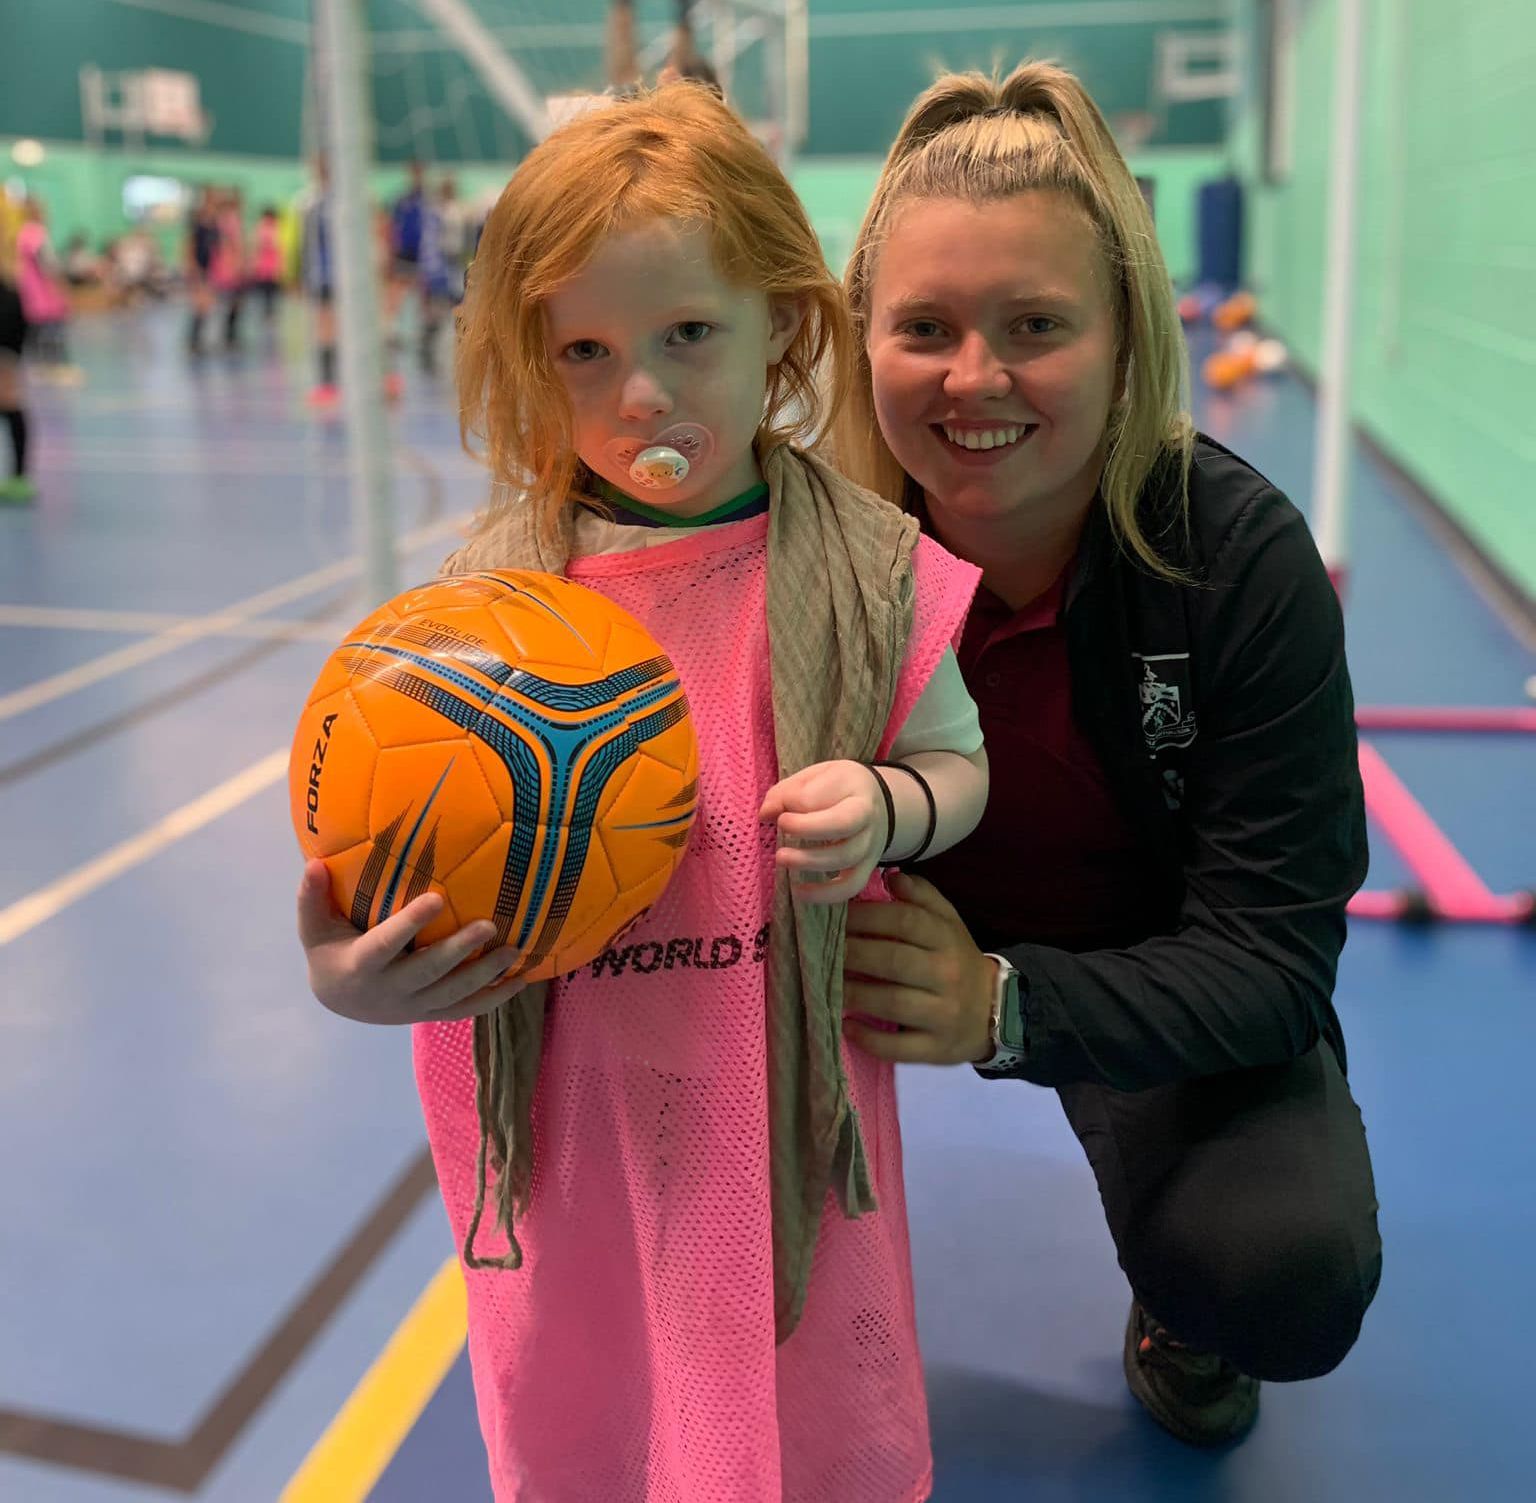 Burnley Womens star Dom Cooper joined Southport Trinity AFC for a special training session to mark the start of the Lionesses World Cup campaign